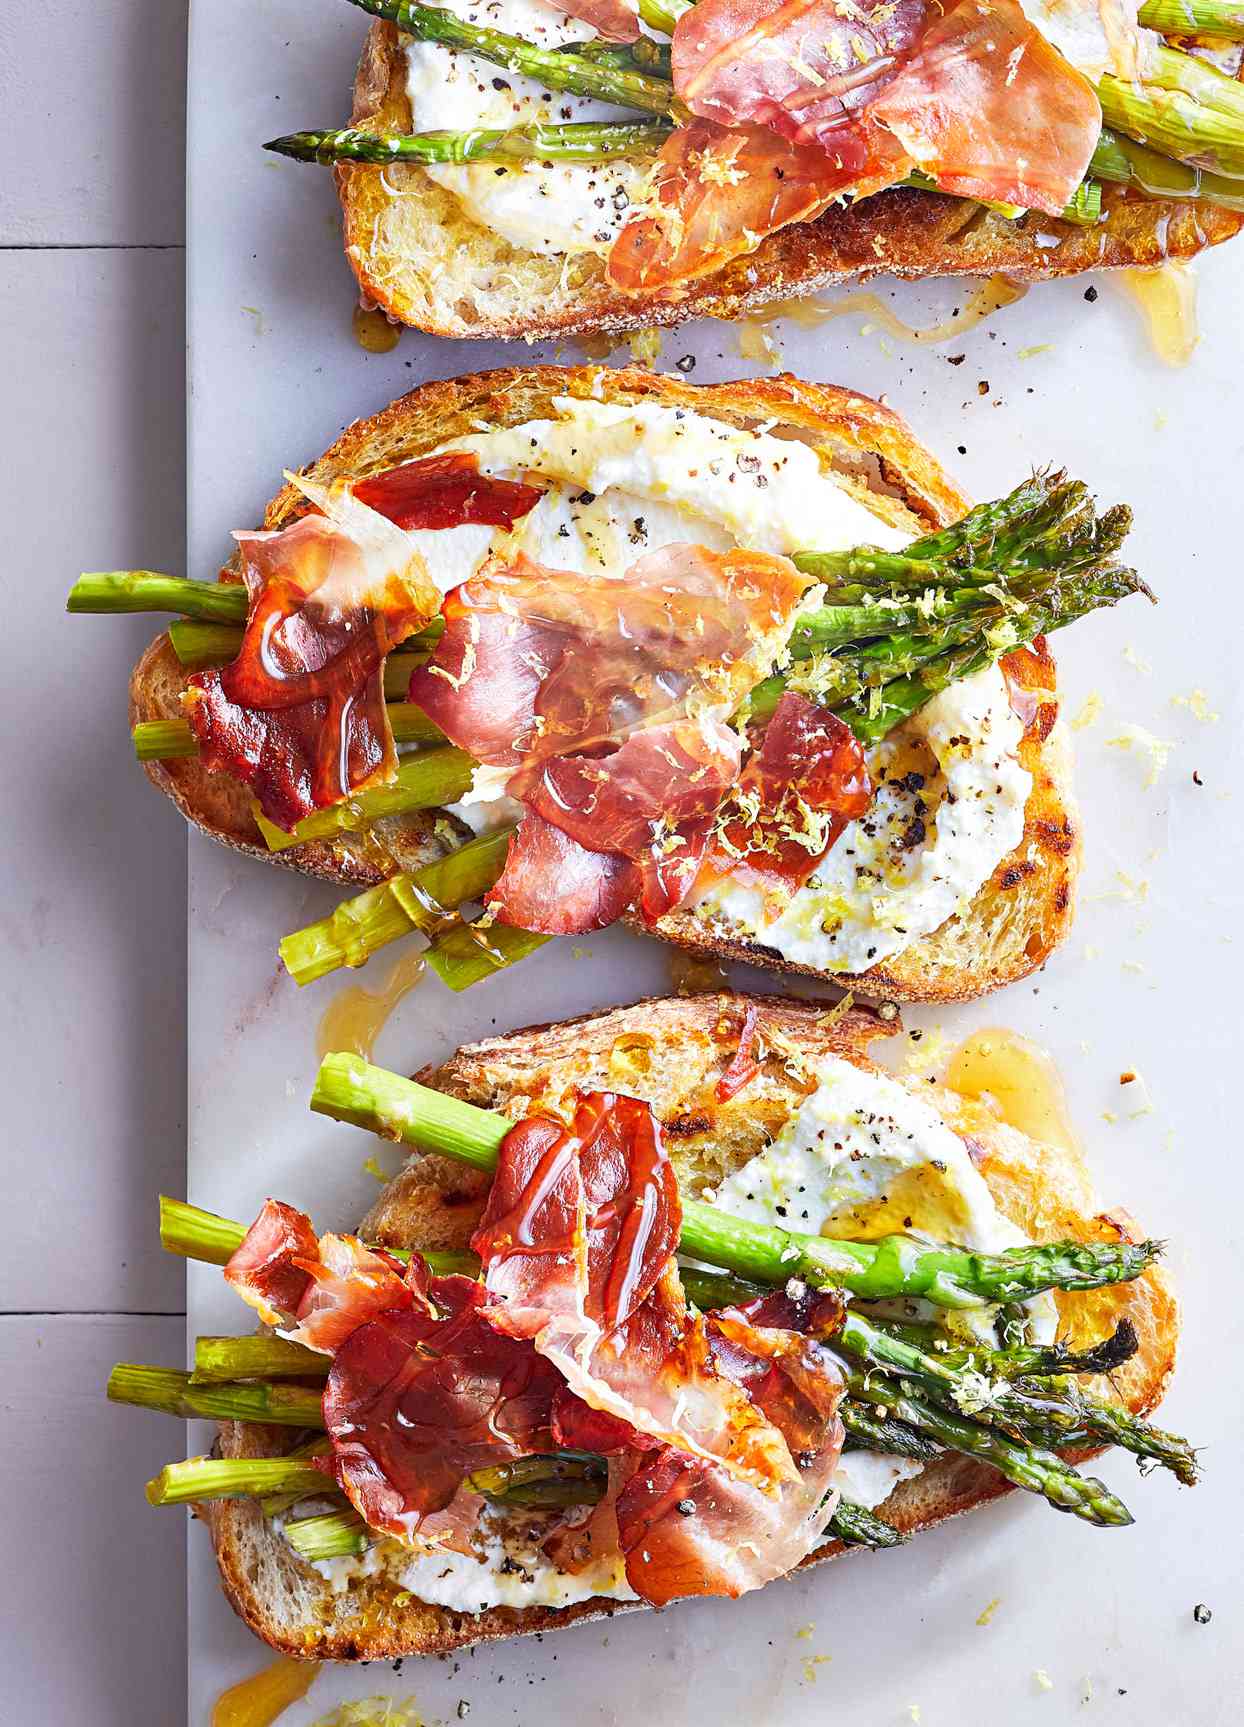 <p>When you're feeling lazy at suppertime or want an inventive lunch or brunch dish, these simple toasts are ready in 15 minutes.</p>
                          <p>Related: Easy Work-from-Home Lunches You'll Make on Repeat</p>
                          